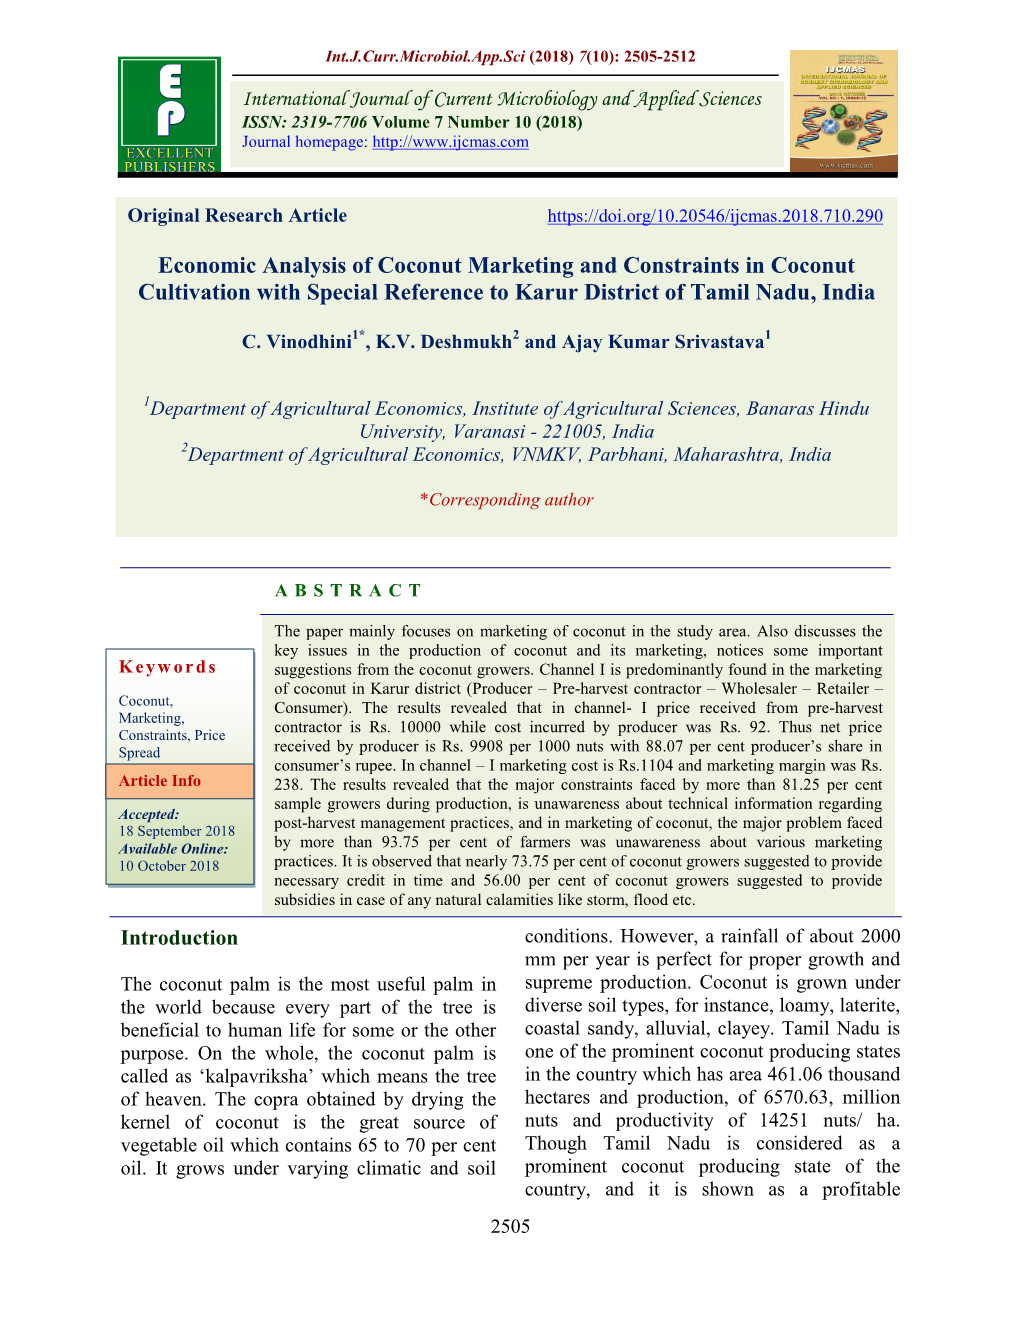 Economic Analysis of Coconut Marketing and Constraints in Coconut Cultivation with Special Reference to Karur District of Tamil Nadu, India